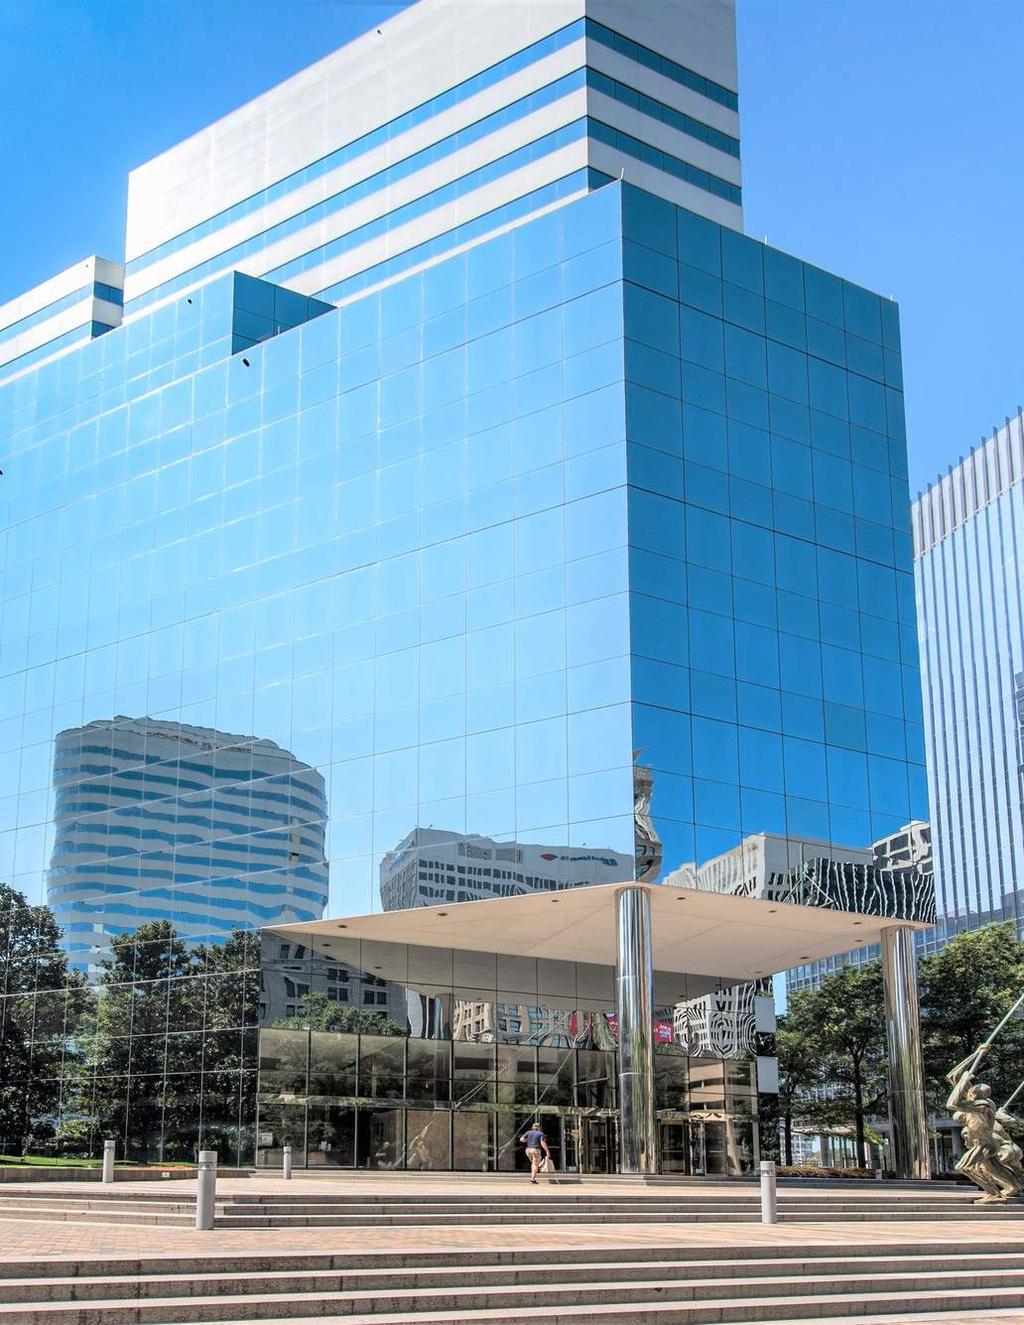 INTRO PAGE RICHMOND'S FINEST The is comprised of three iconic Class A office towers, comprising more than 1,000,000 square feet of high quality office and retail space.